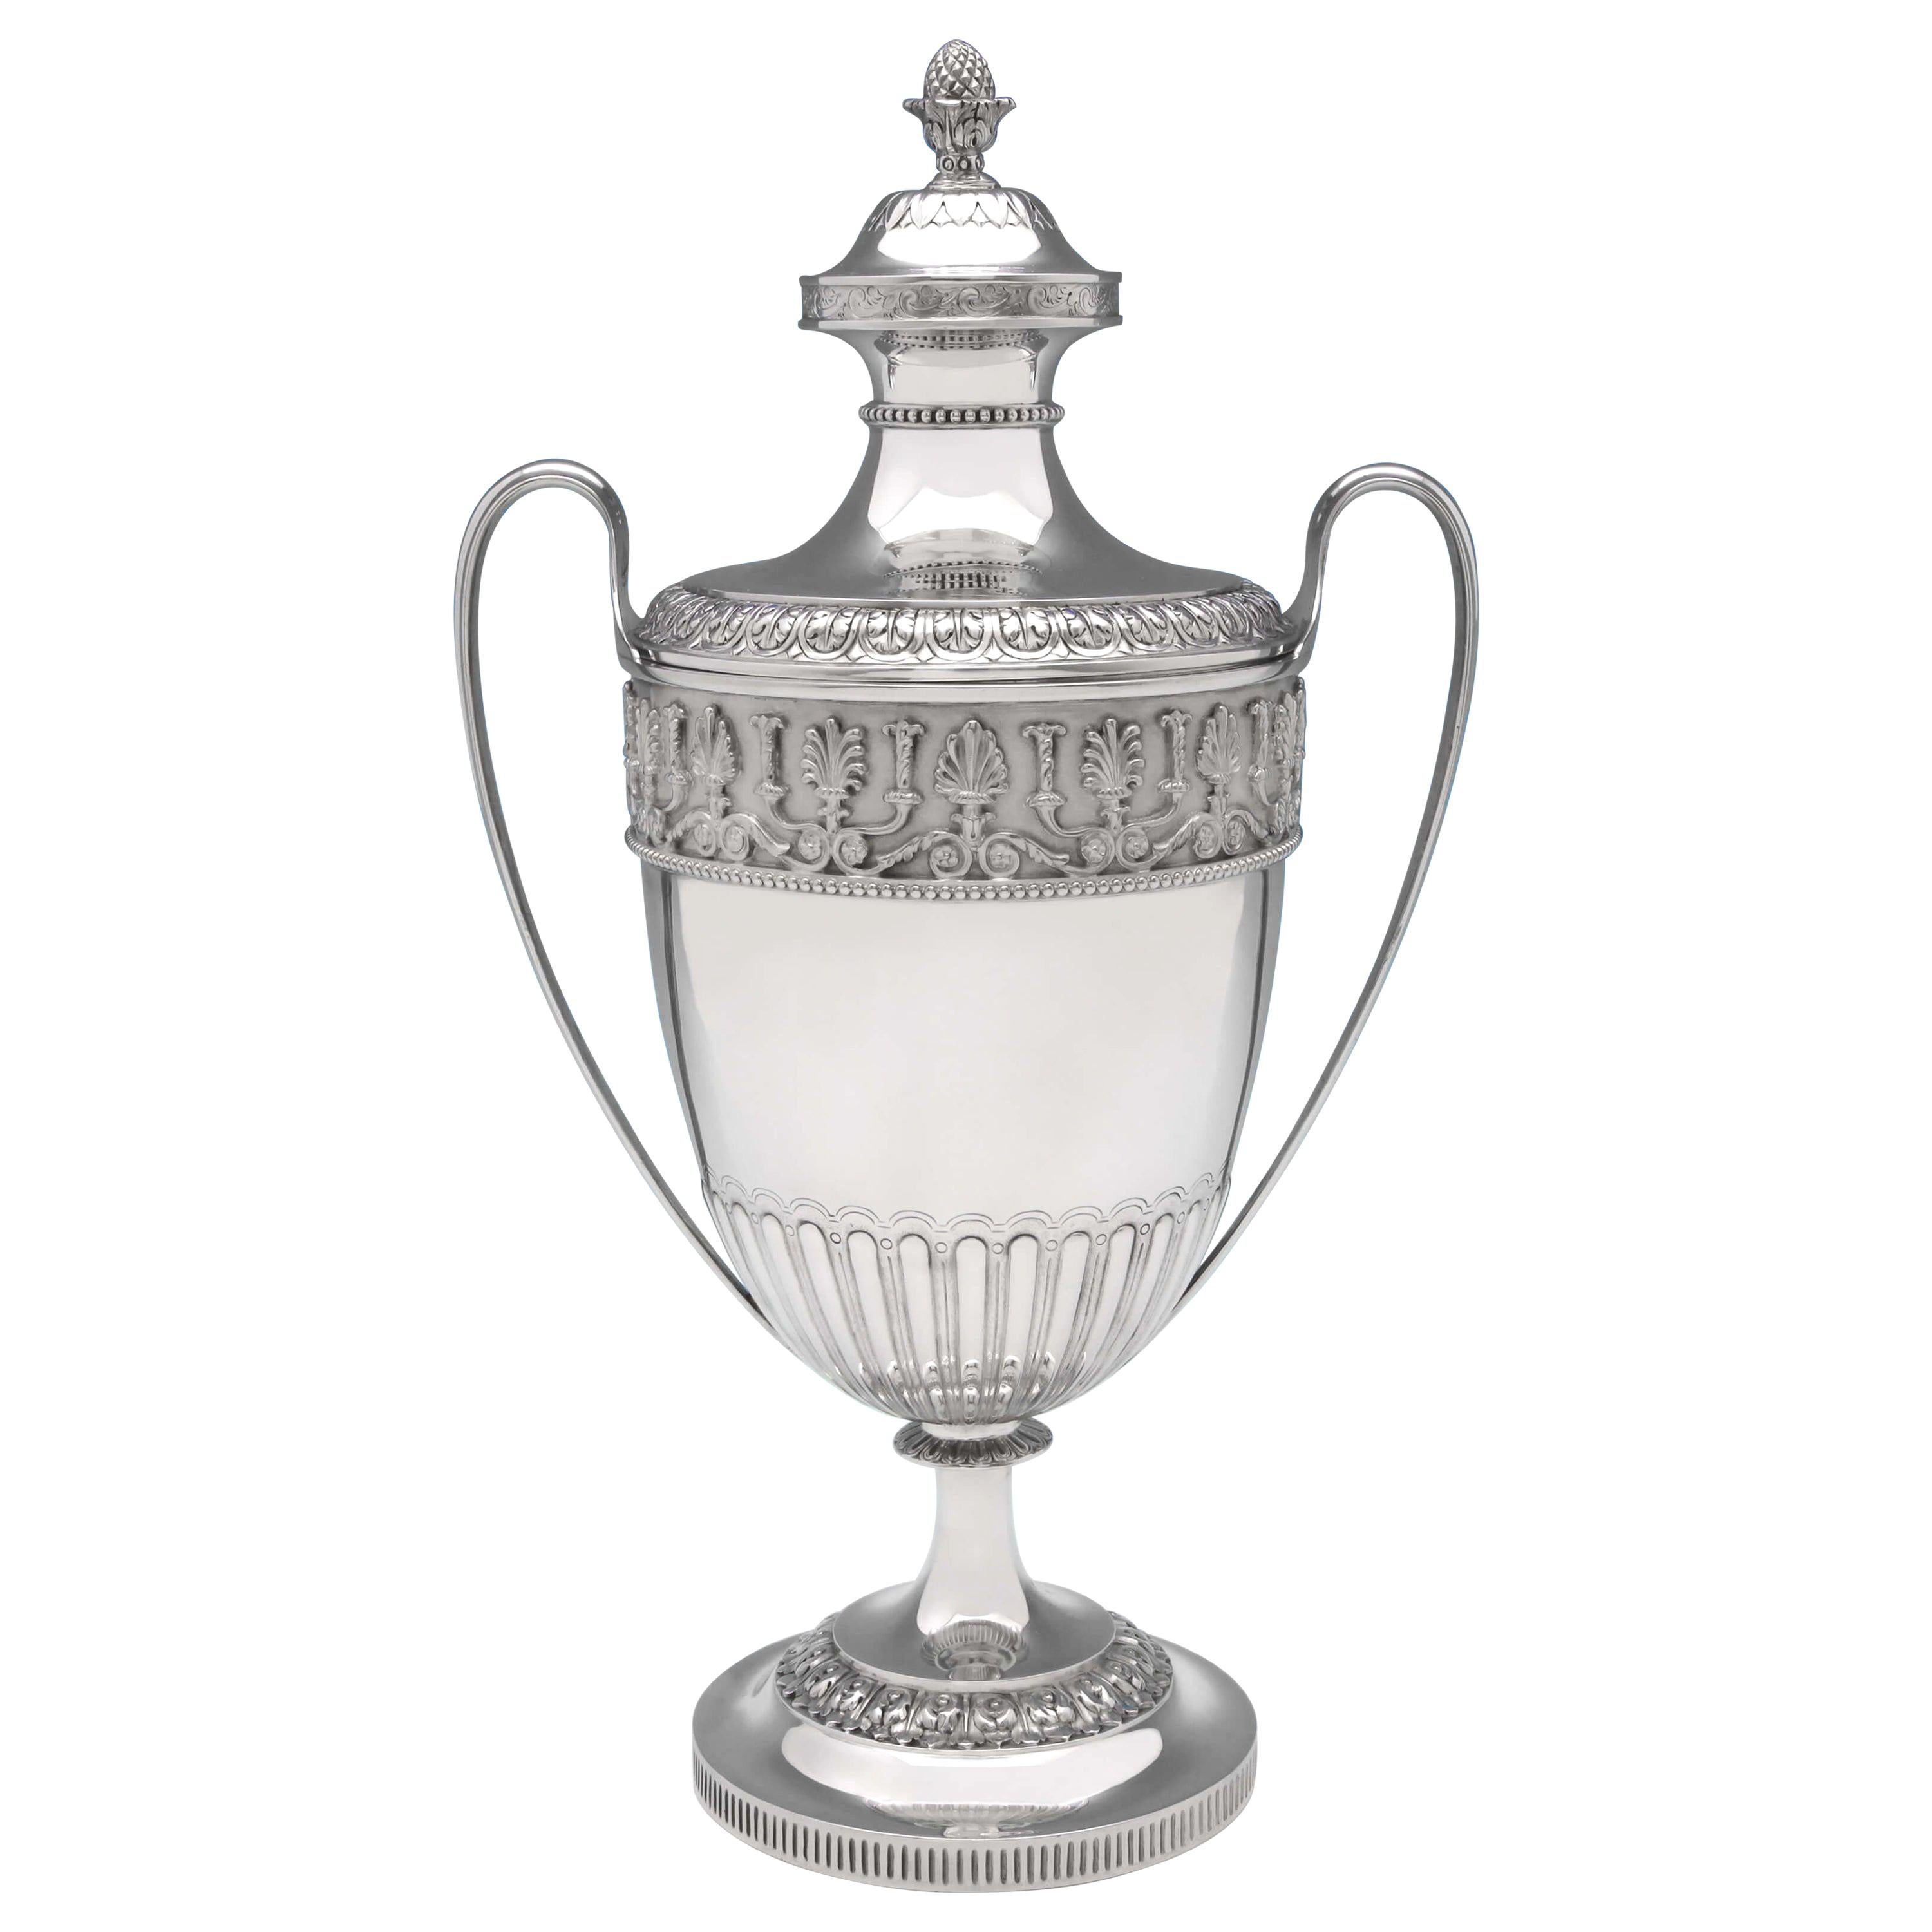 Victorian Neoclassical Design Sterling Silver Trophy Hallmarked London, 1872